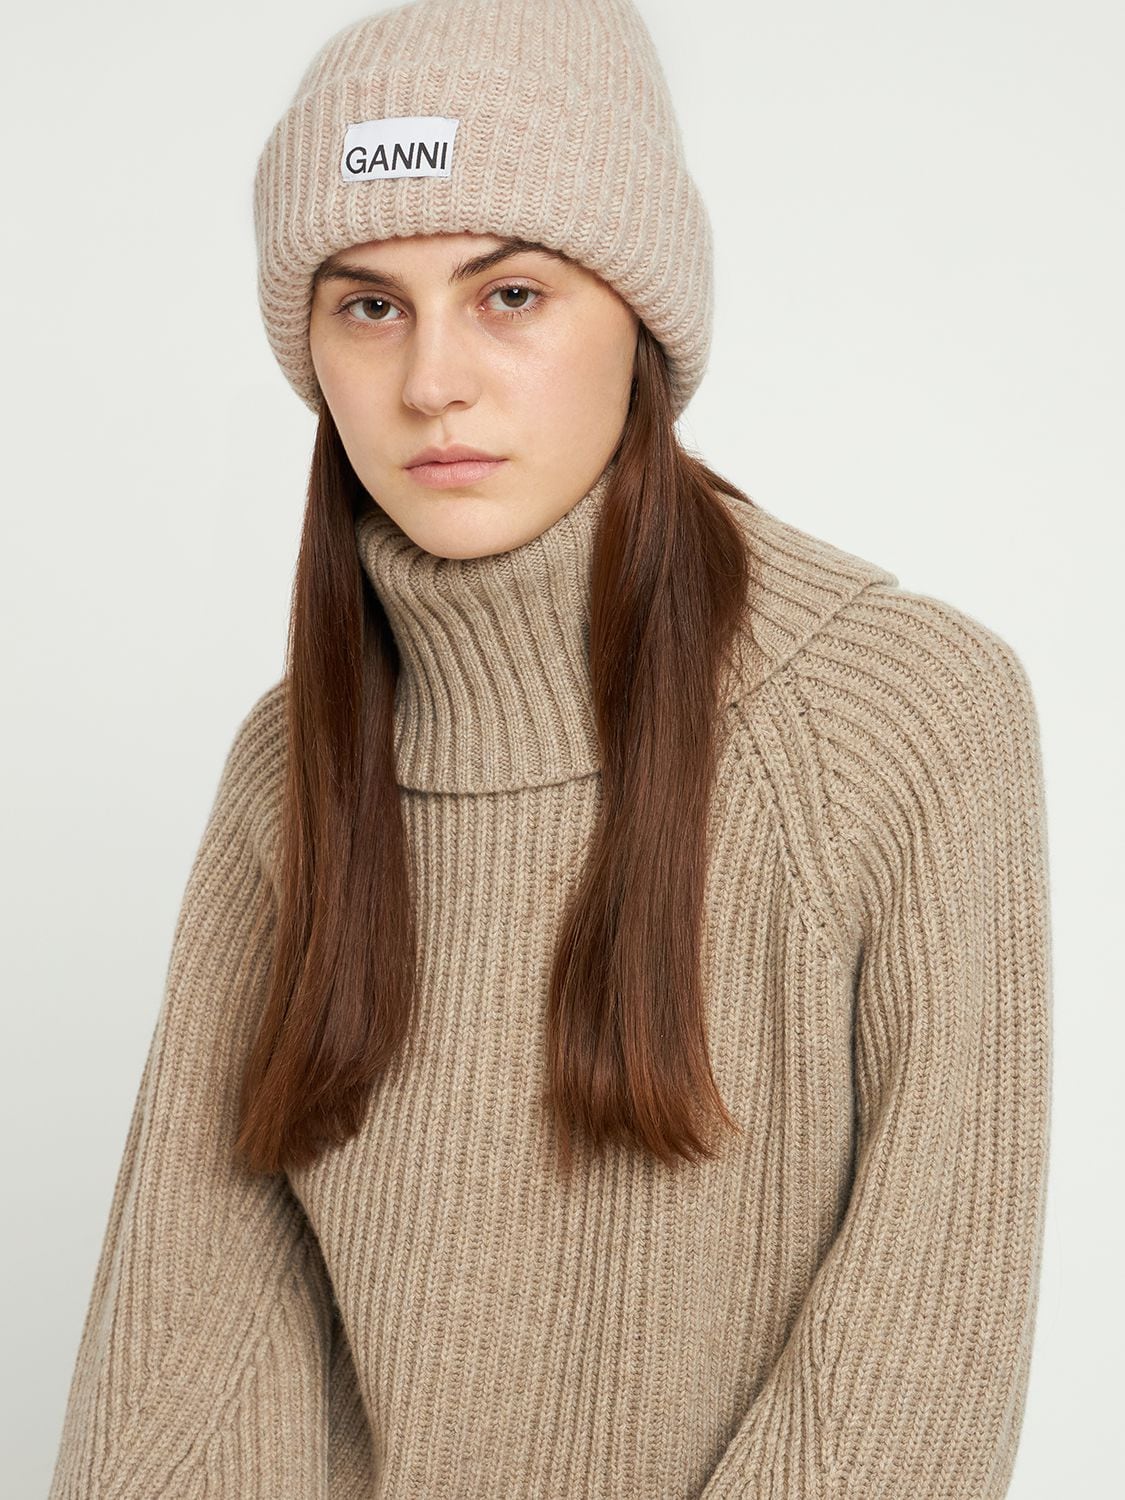 GANNI Structured Ribbed Beanie